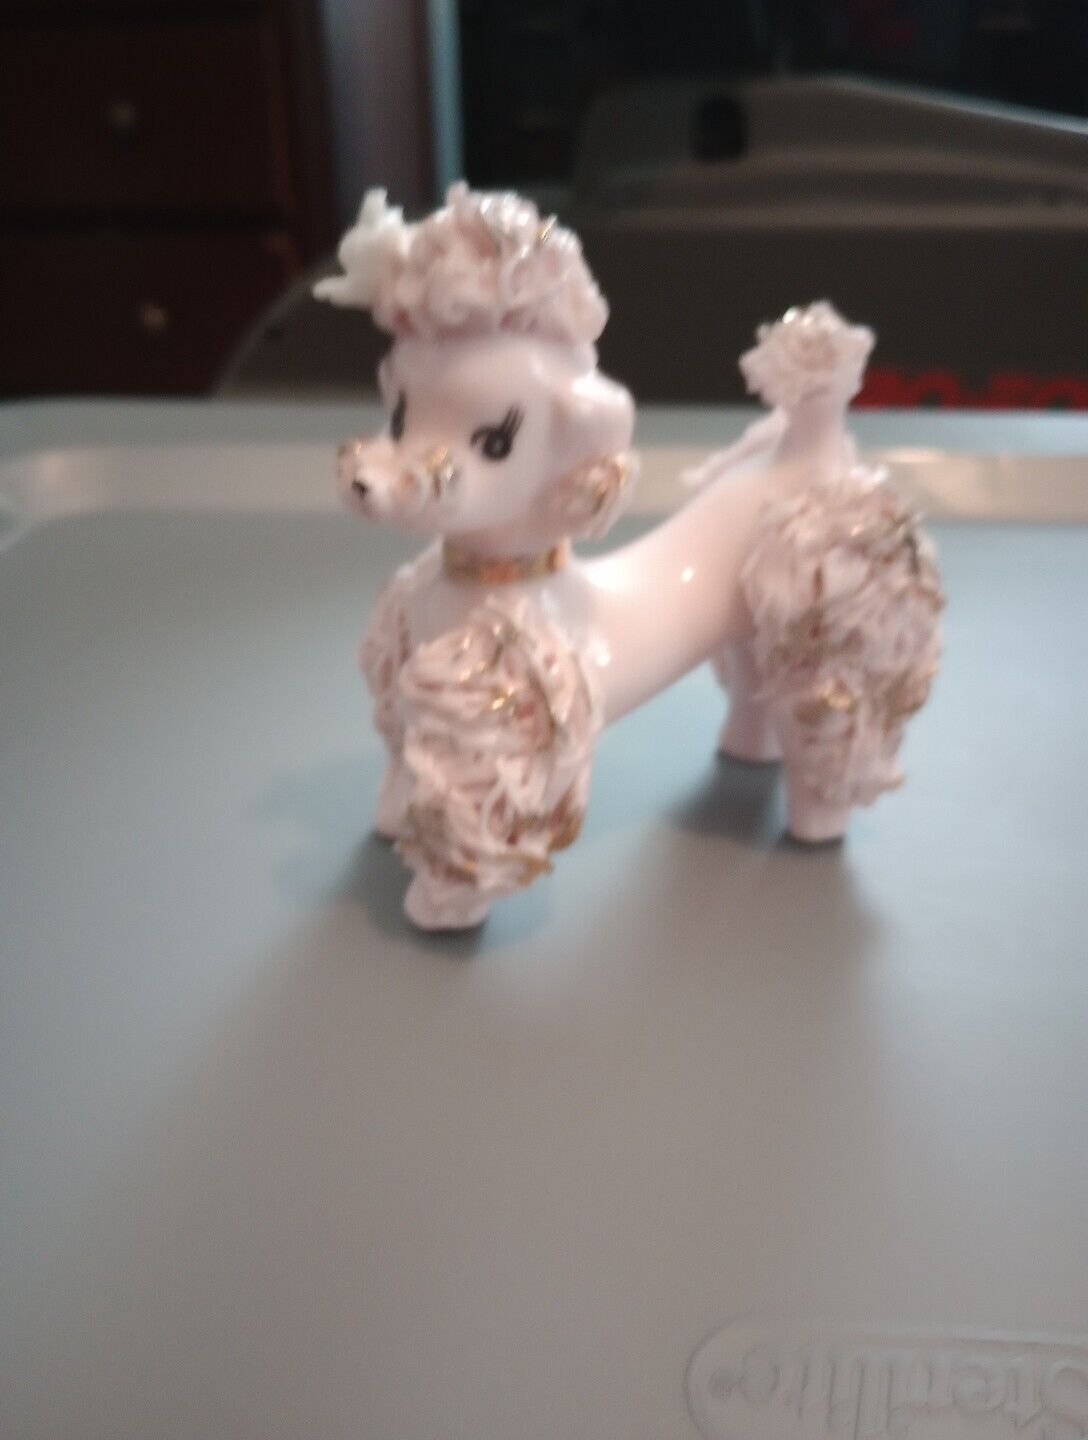 Vintage Ceramic Pink Poodle with Spaghetti Hair 3.75” L x 4” Tall .Marked Inarco